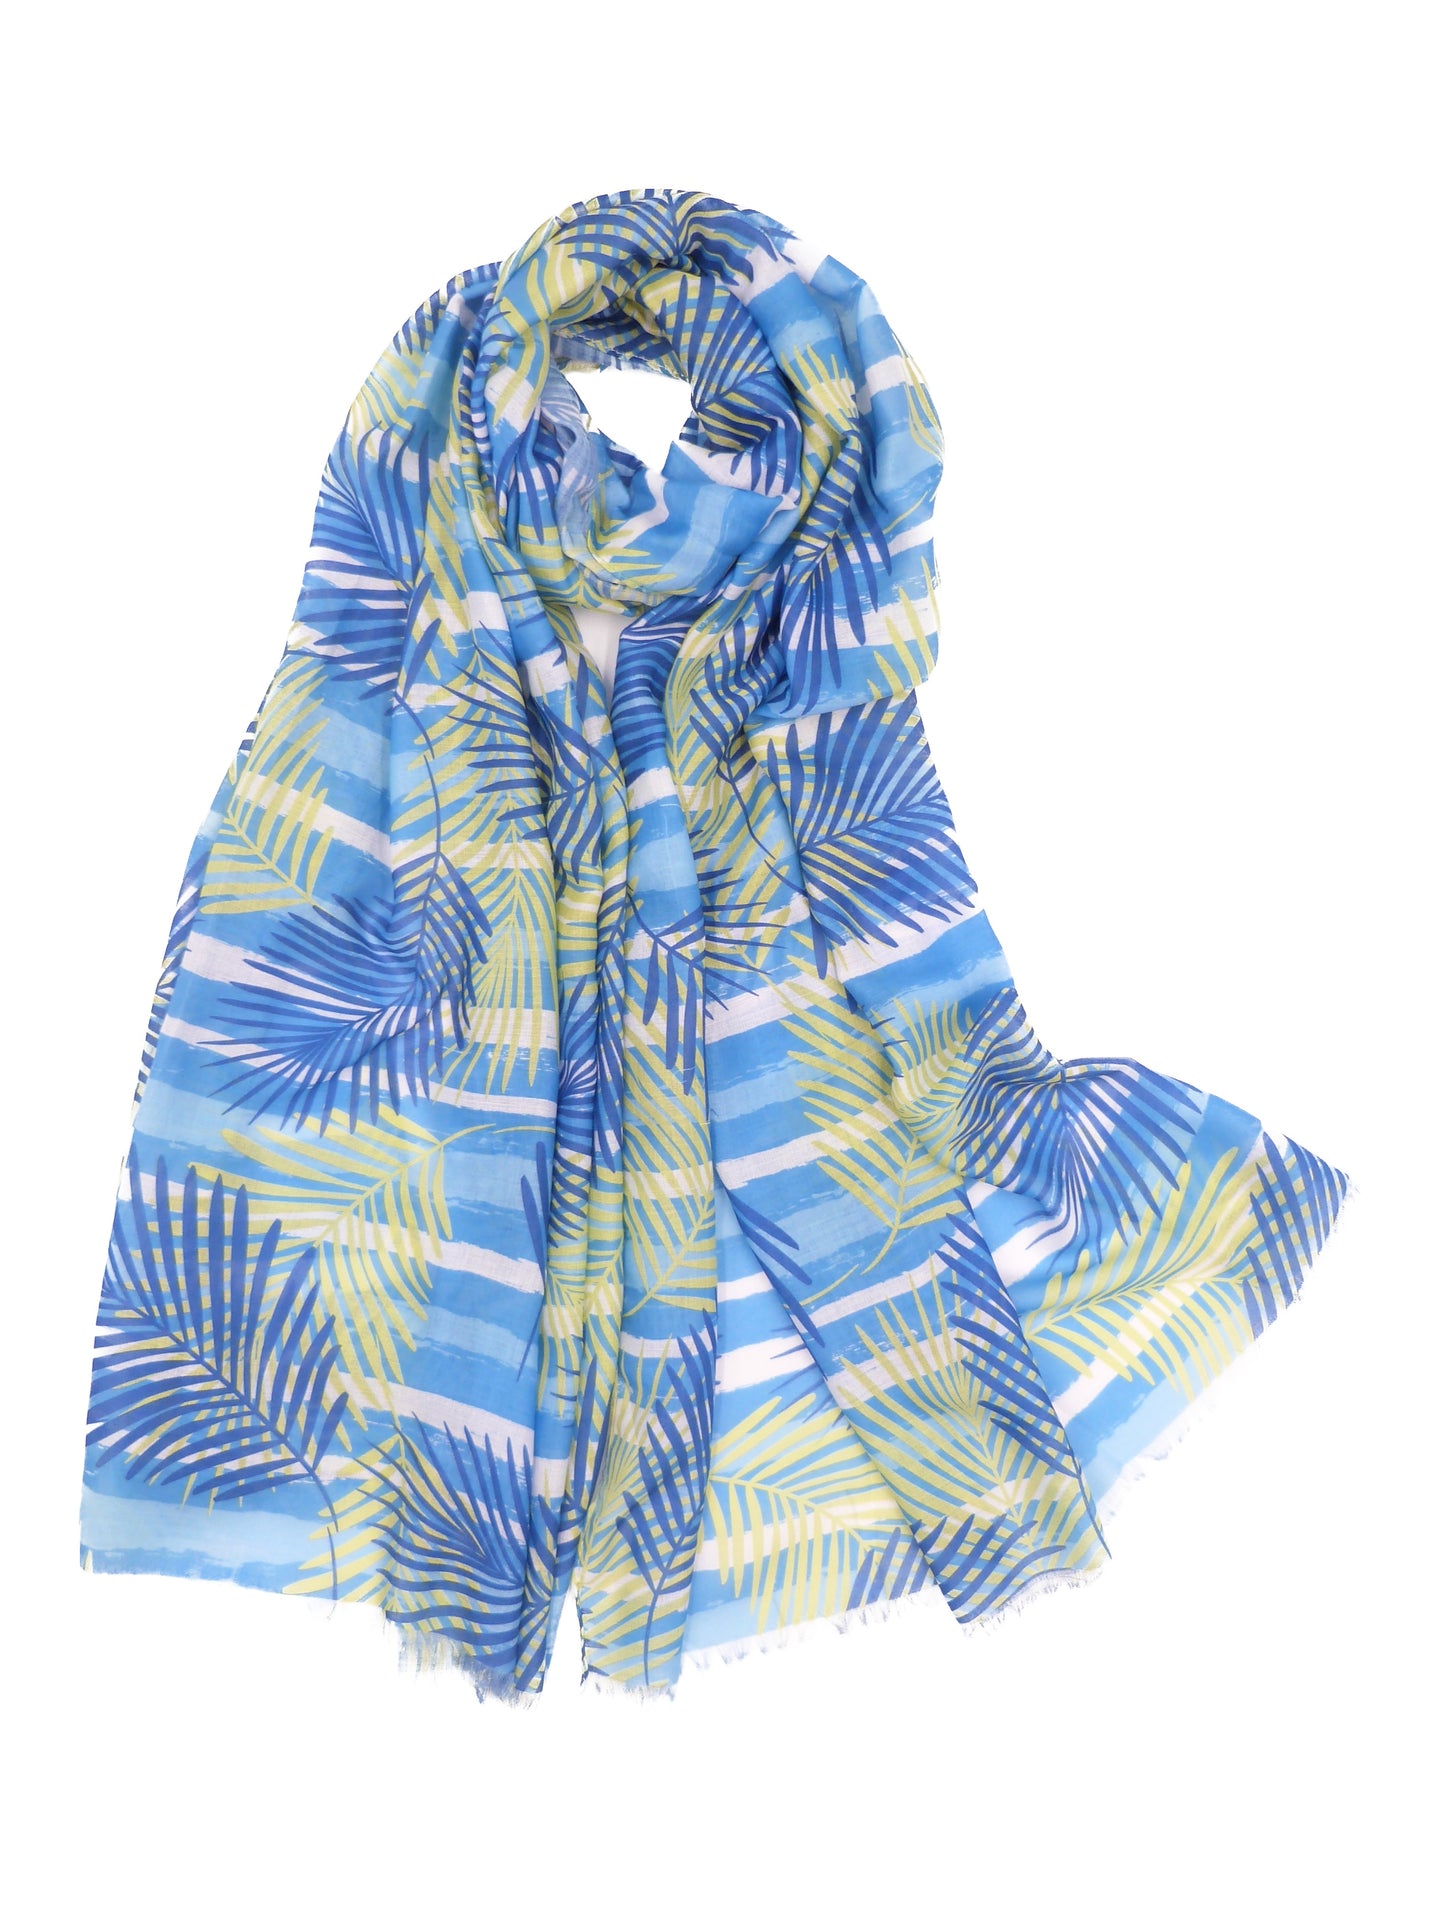 Rainforest Tree Leaf Print Scarf Come With Gift Box